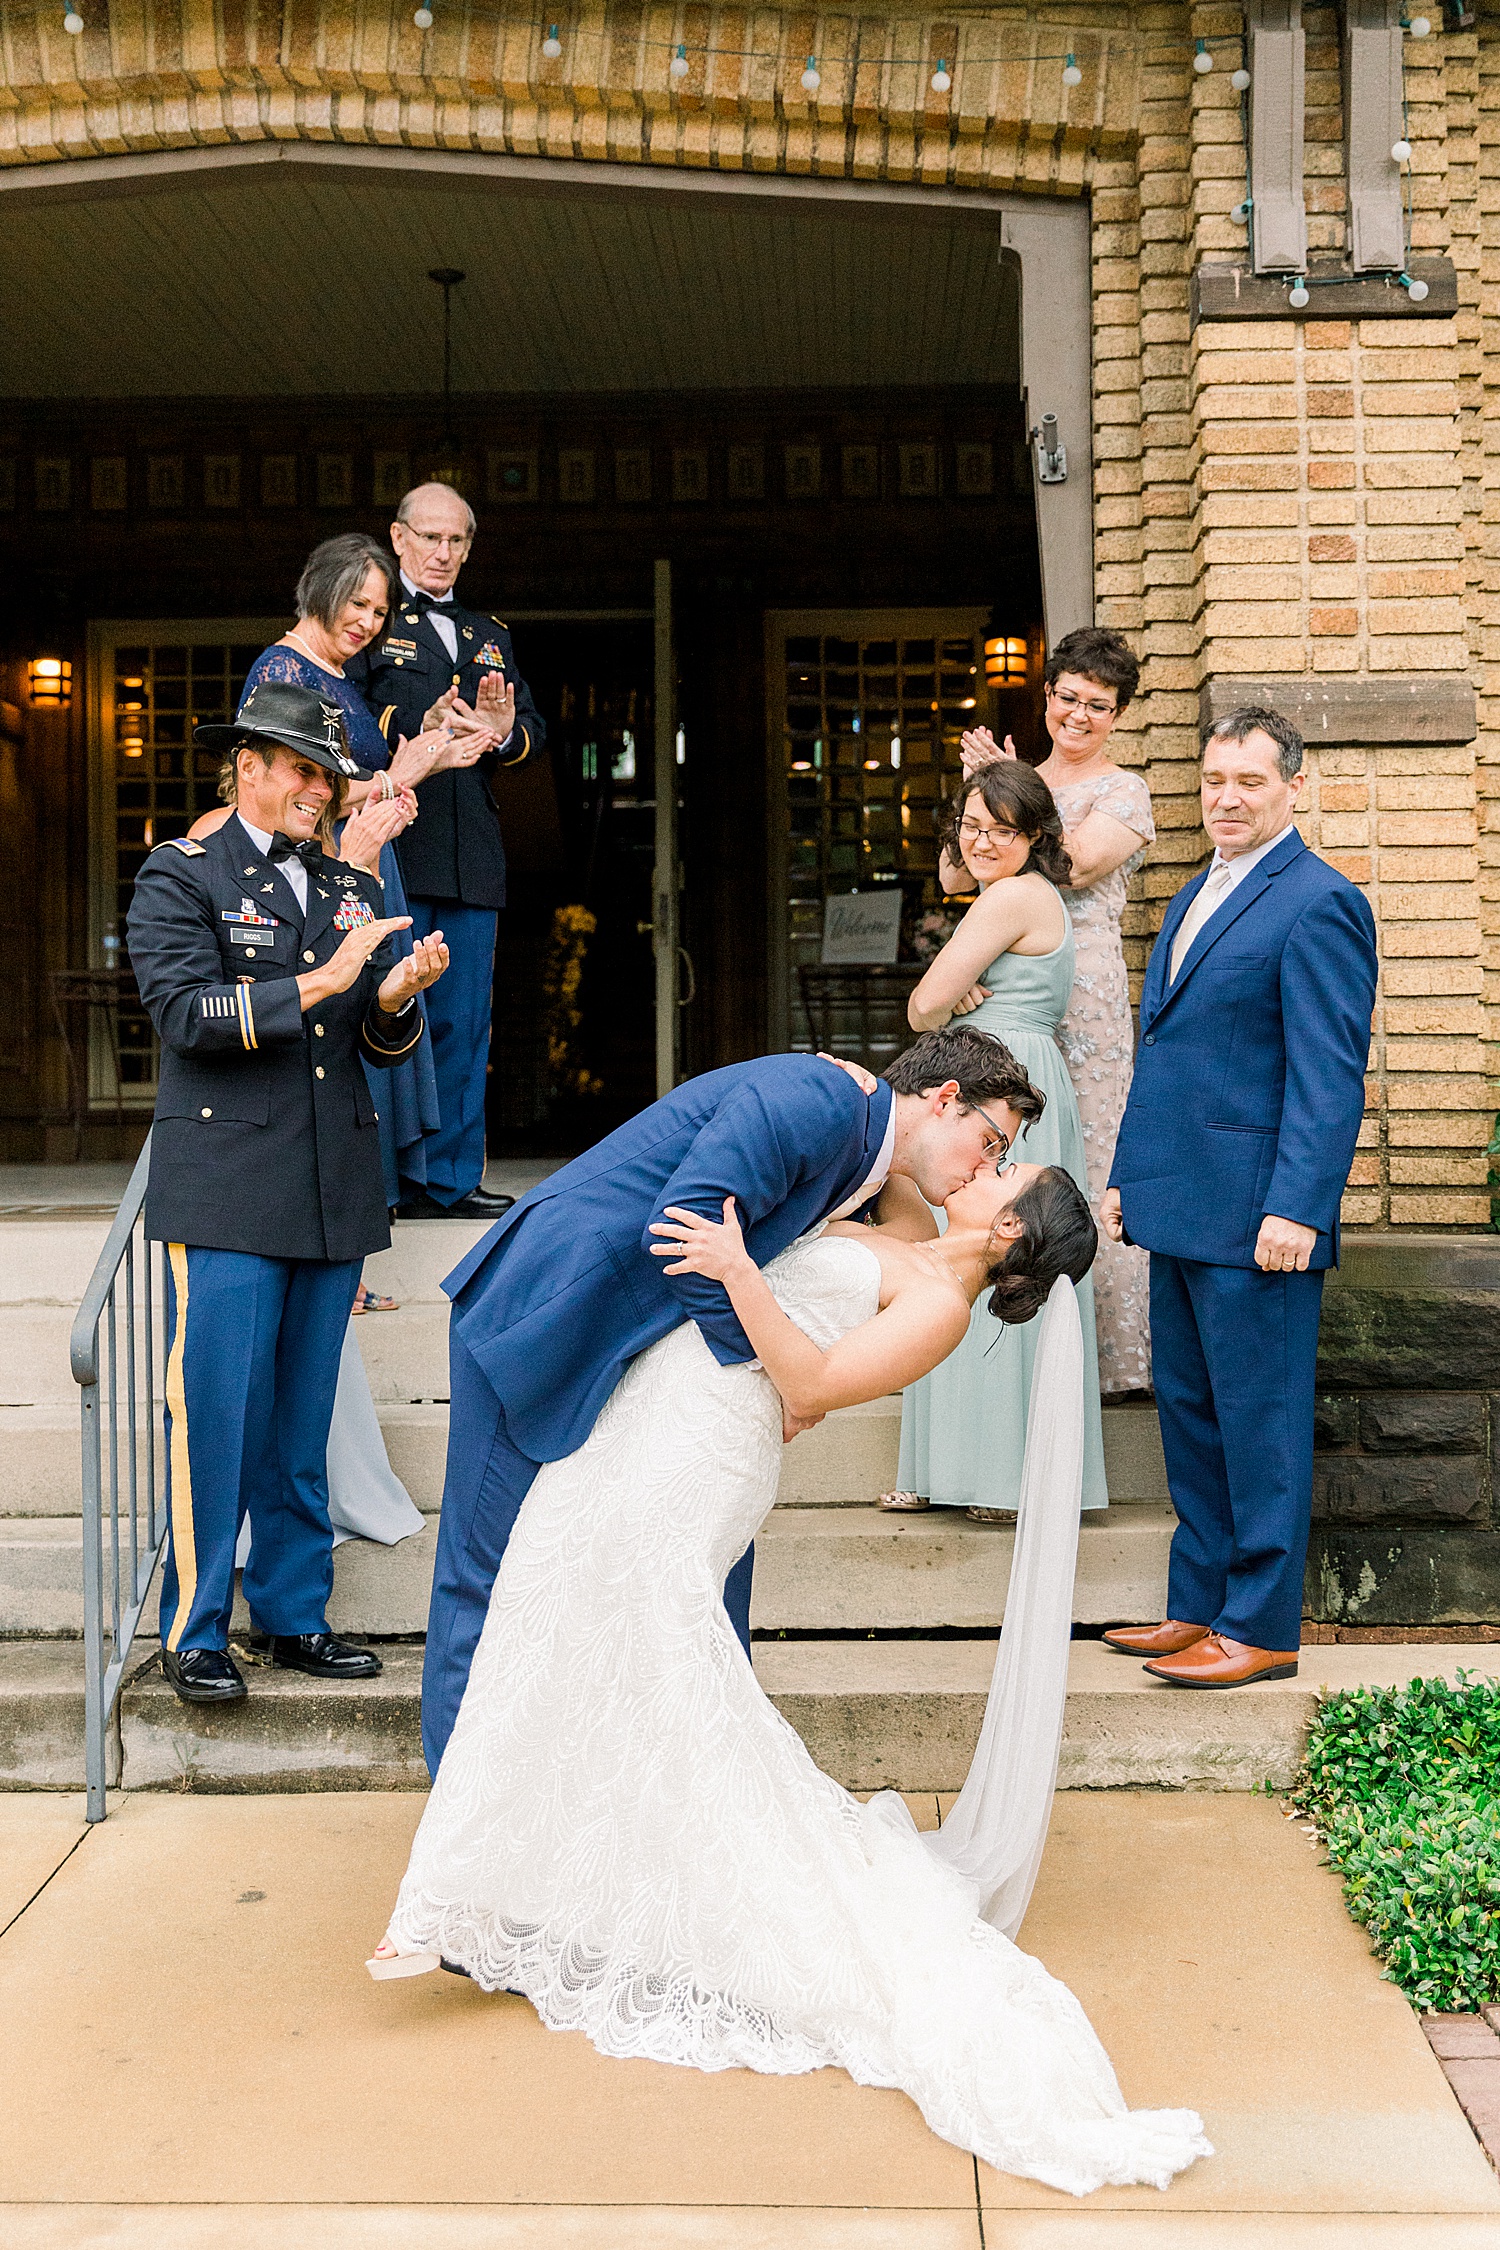 newlyweds kiss at the bottom of stairs outside venue by Chelsea Morton Photography